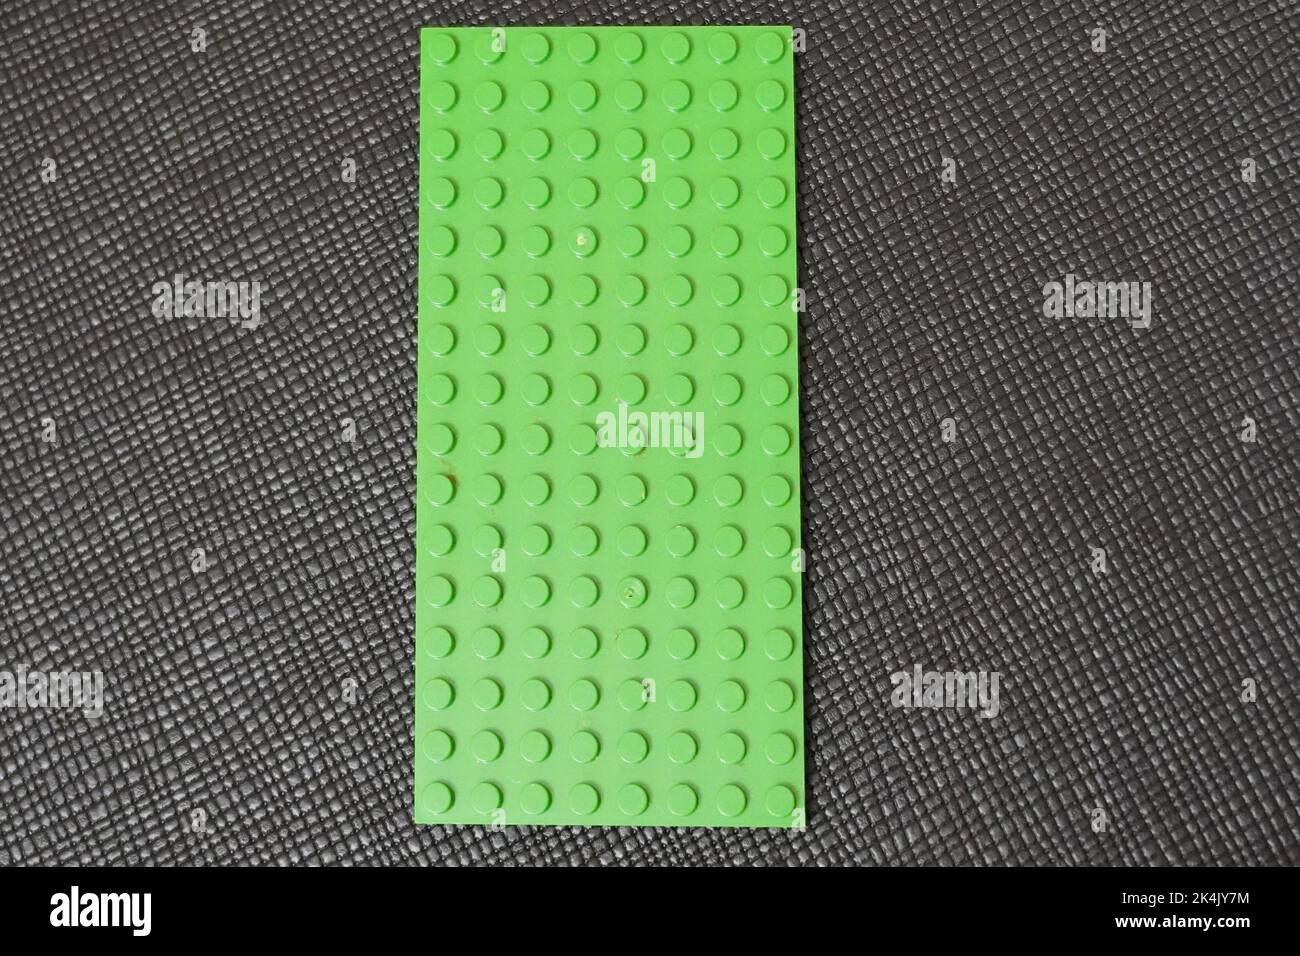 Seamless vector pattern of building brick blocks toy like Lego. Colorful plastic toy bricks for children, Brick toy design seamless for kids fashion, Stock Photo